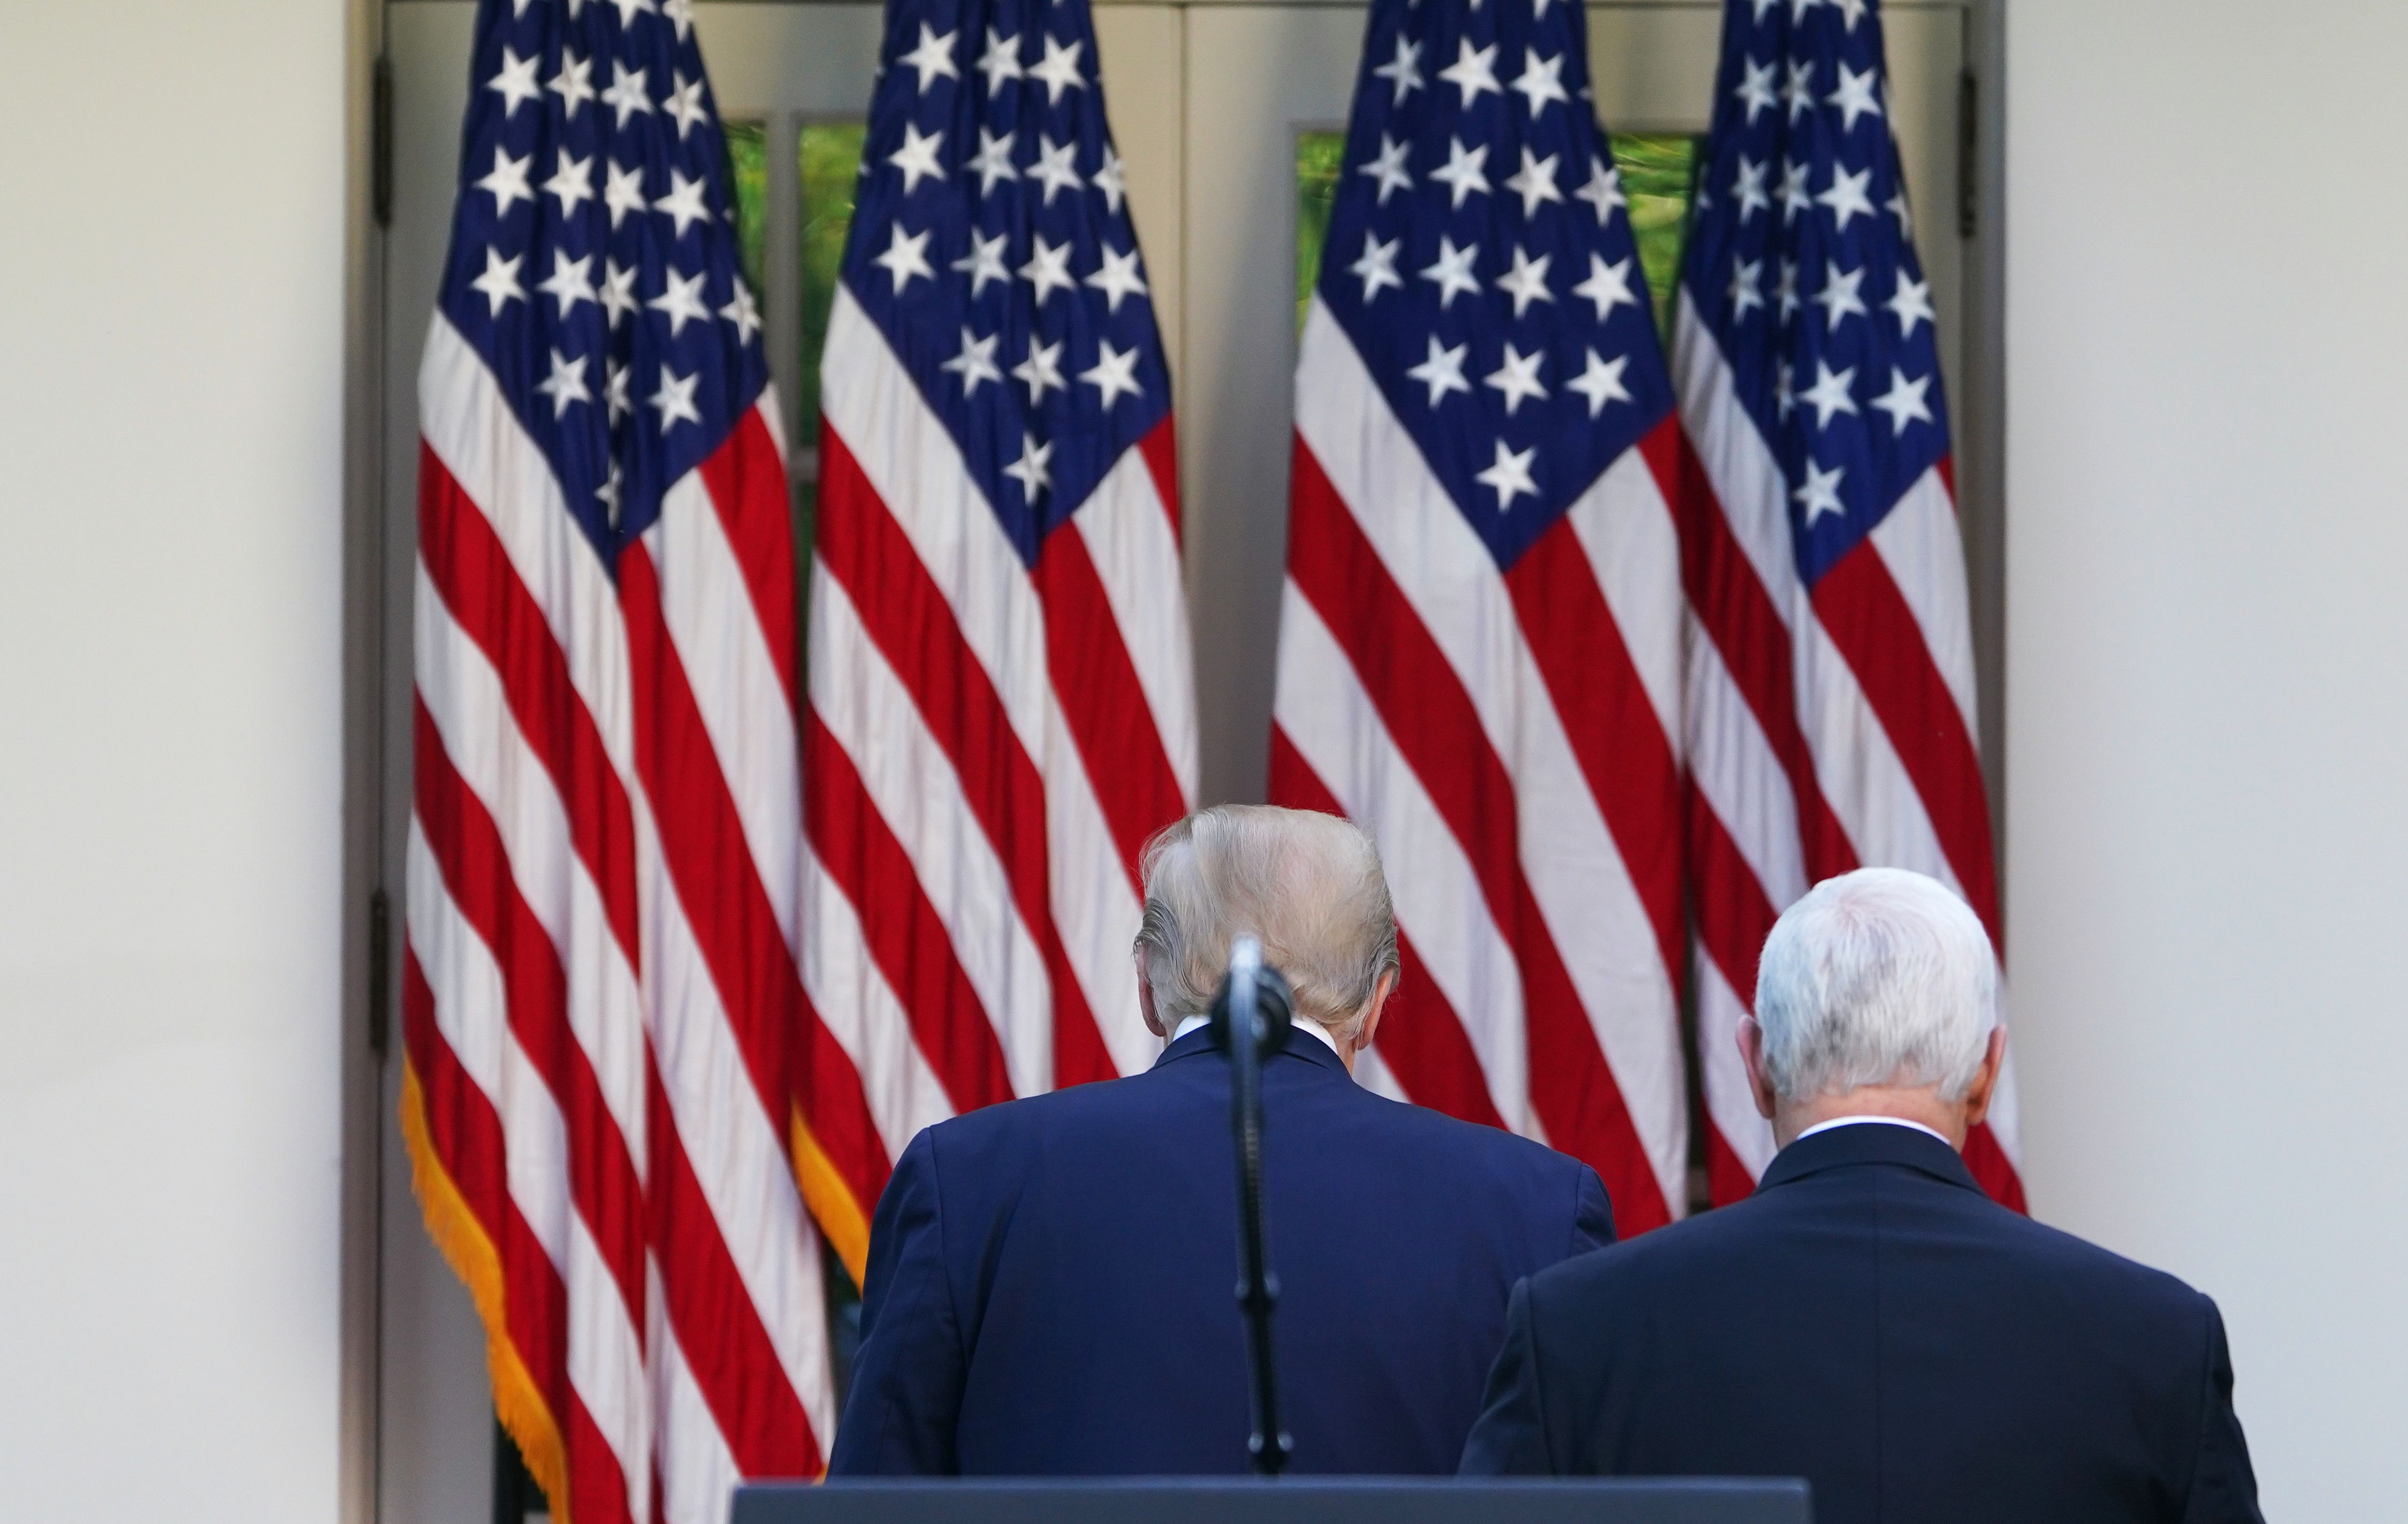 US President Donald Trump (L) and US Vice President Mike Pence return to the Oval Office after a press conference on the novel coronavirus, COVID-19, in the Rose Garden of the White House in Washington, DC on April 27, 2020. (Photo by MANDEL NGAN/AFP via Getty Images)